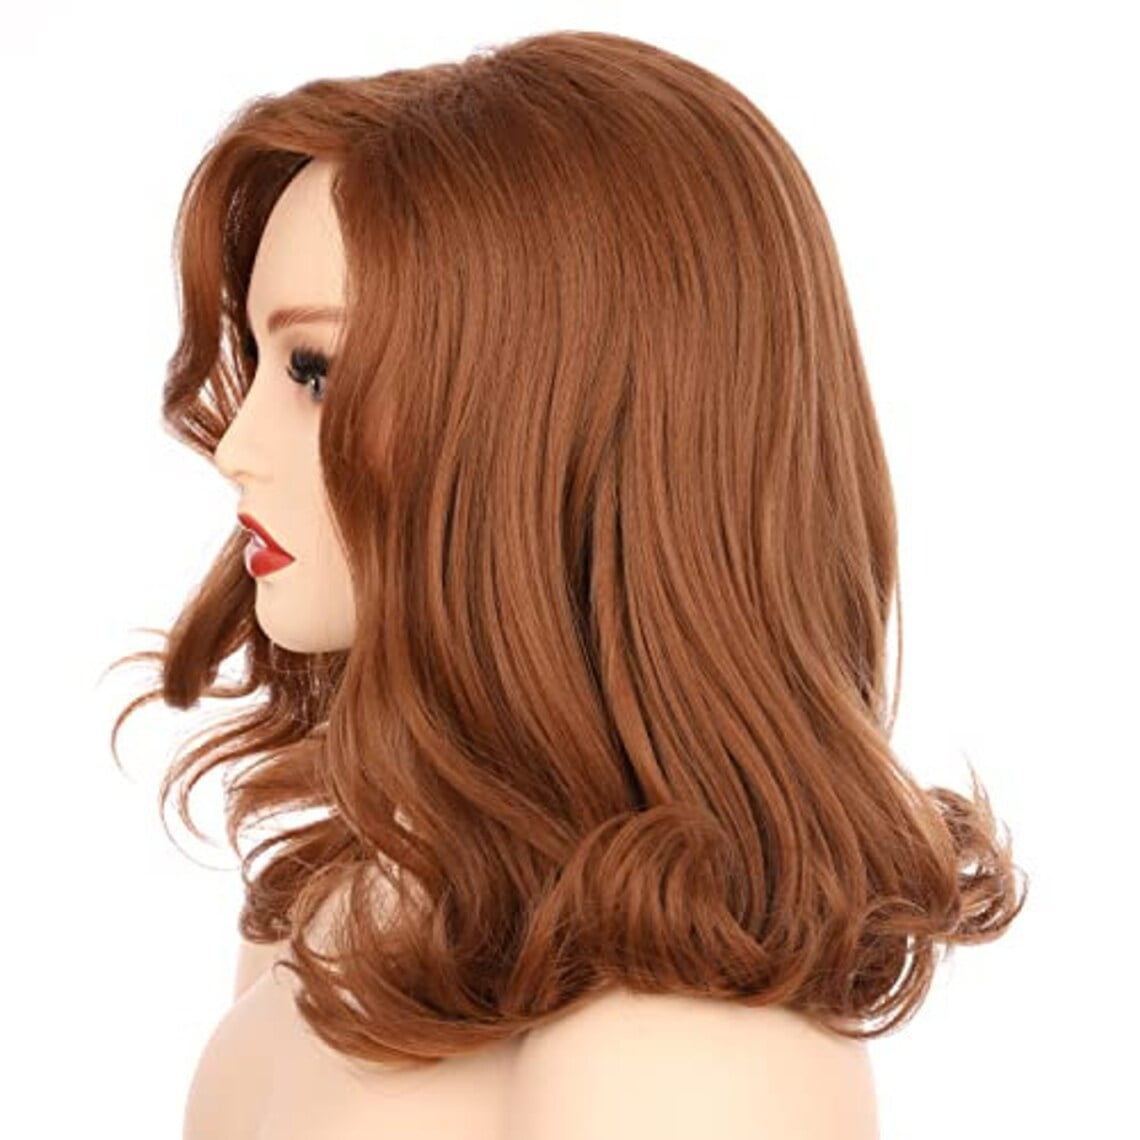  XZGDEN Wigs Hair Wig Women Synthetic Hair Wigs Short Curly  Blonde Brown Black Gray Wig Heat Resistant Free (Color : Grey, Size :  14inches), 14 Inch : 美容與個人護理